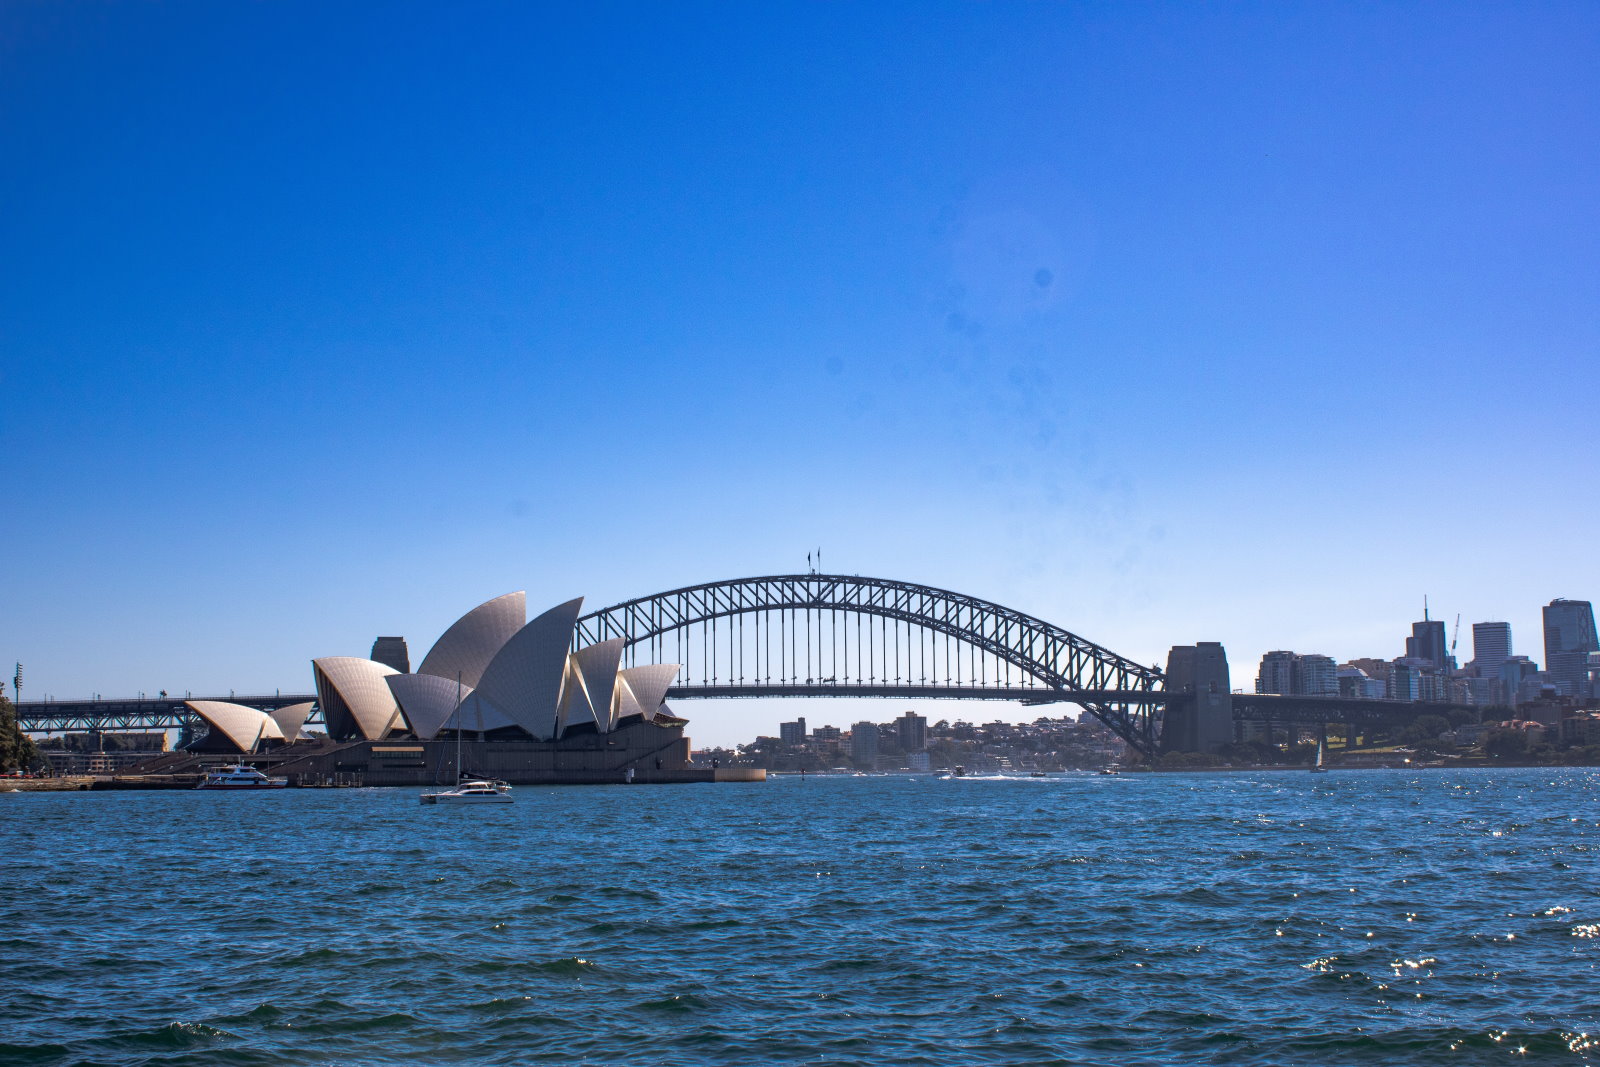 Sydney Harbour and the Sydney Opera House